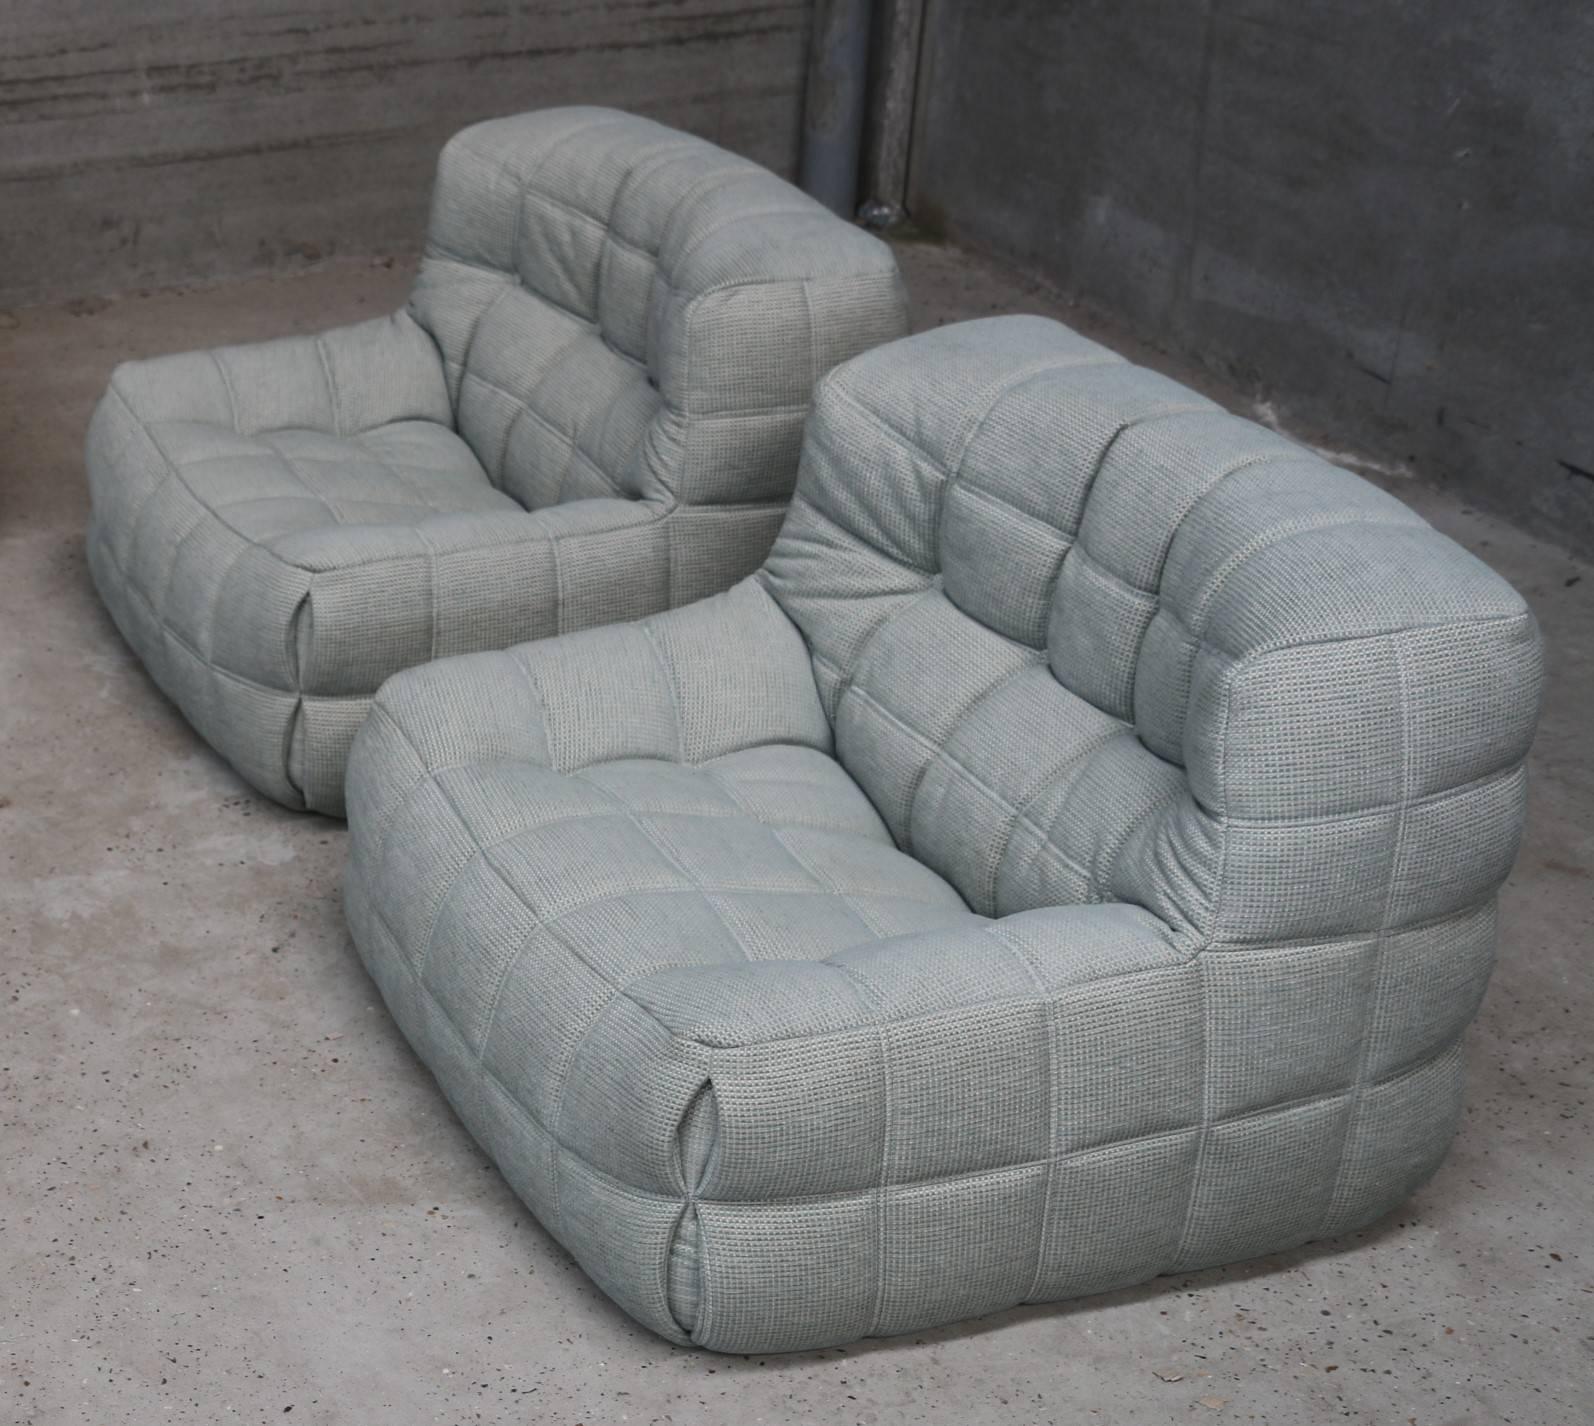 This stunning set of two single seat Kashima, re-upholstered by funky vintage Belgium
We used a beautiful blue/grey fabric, foam in excellent condition, original Ligne Roset pin and bottom fabric replaced.
Two-seat available in the same fabric.